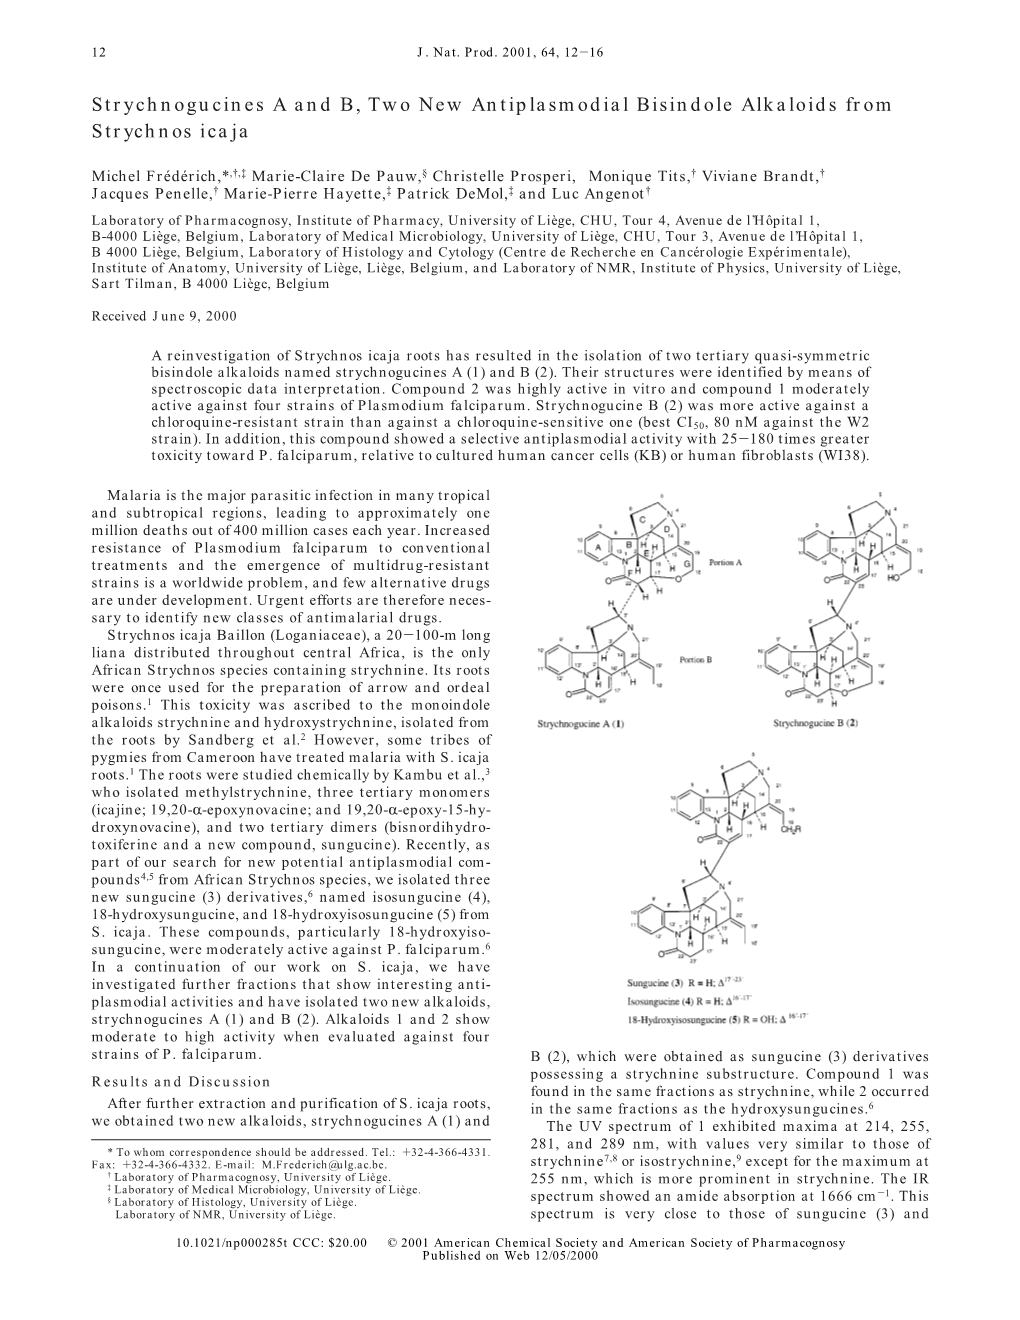 Strychnogucines a and B, Two New Antiplasmodial Bisindole Alkaloids from Strychnos Icaja